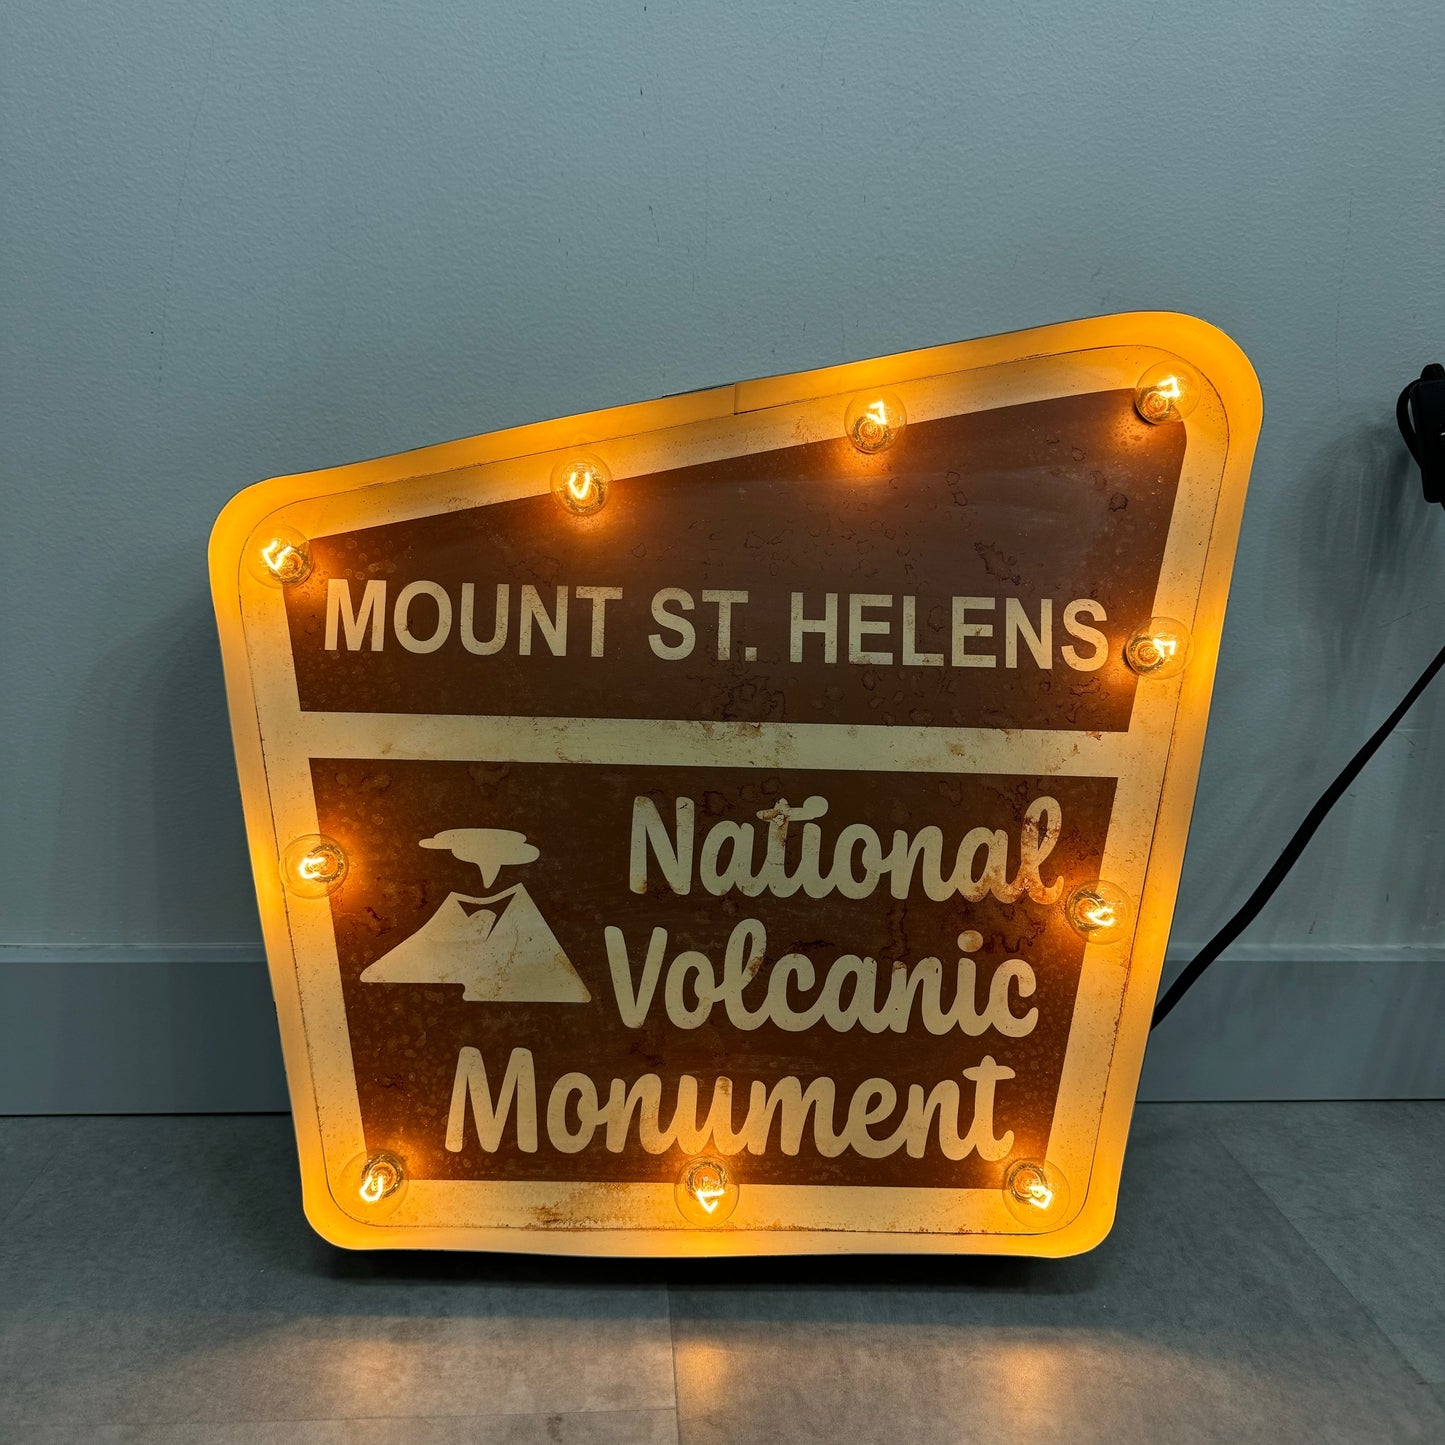 Mt St. Helens National Volcanic Monument Lighted Sign - Walnut Brown